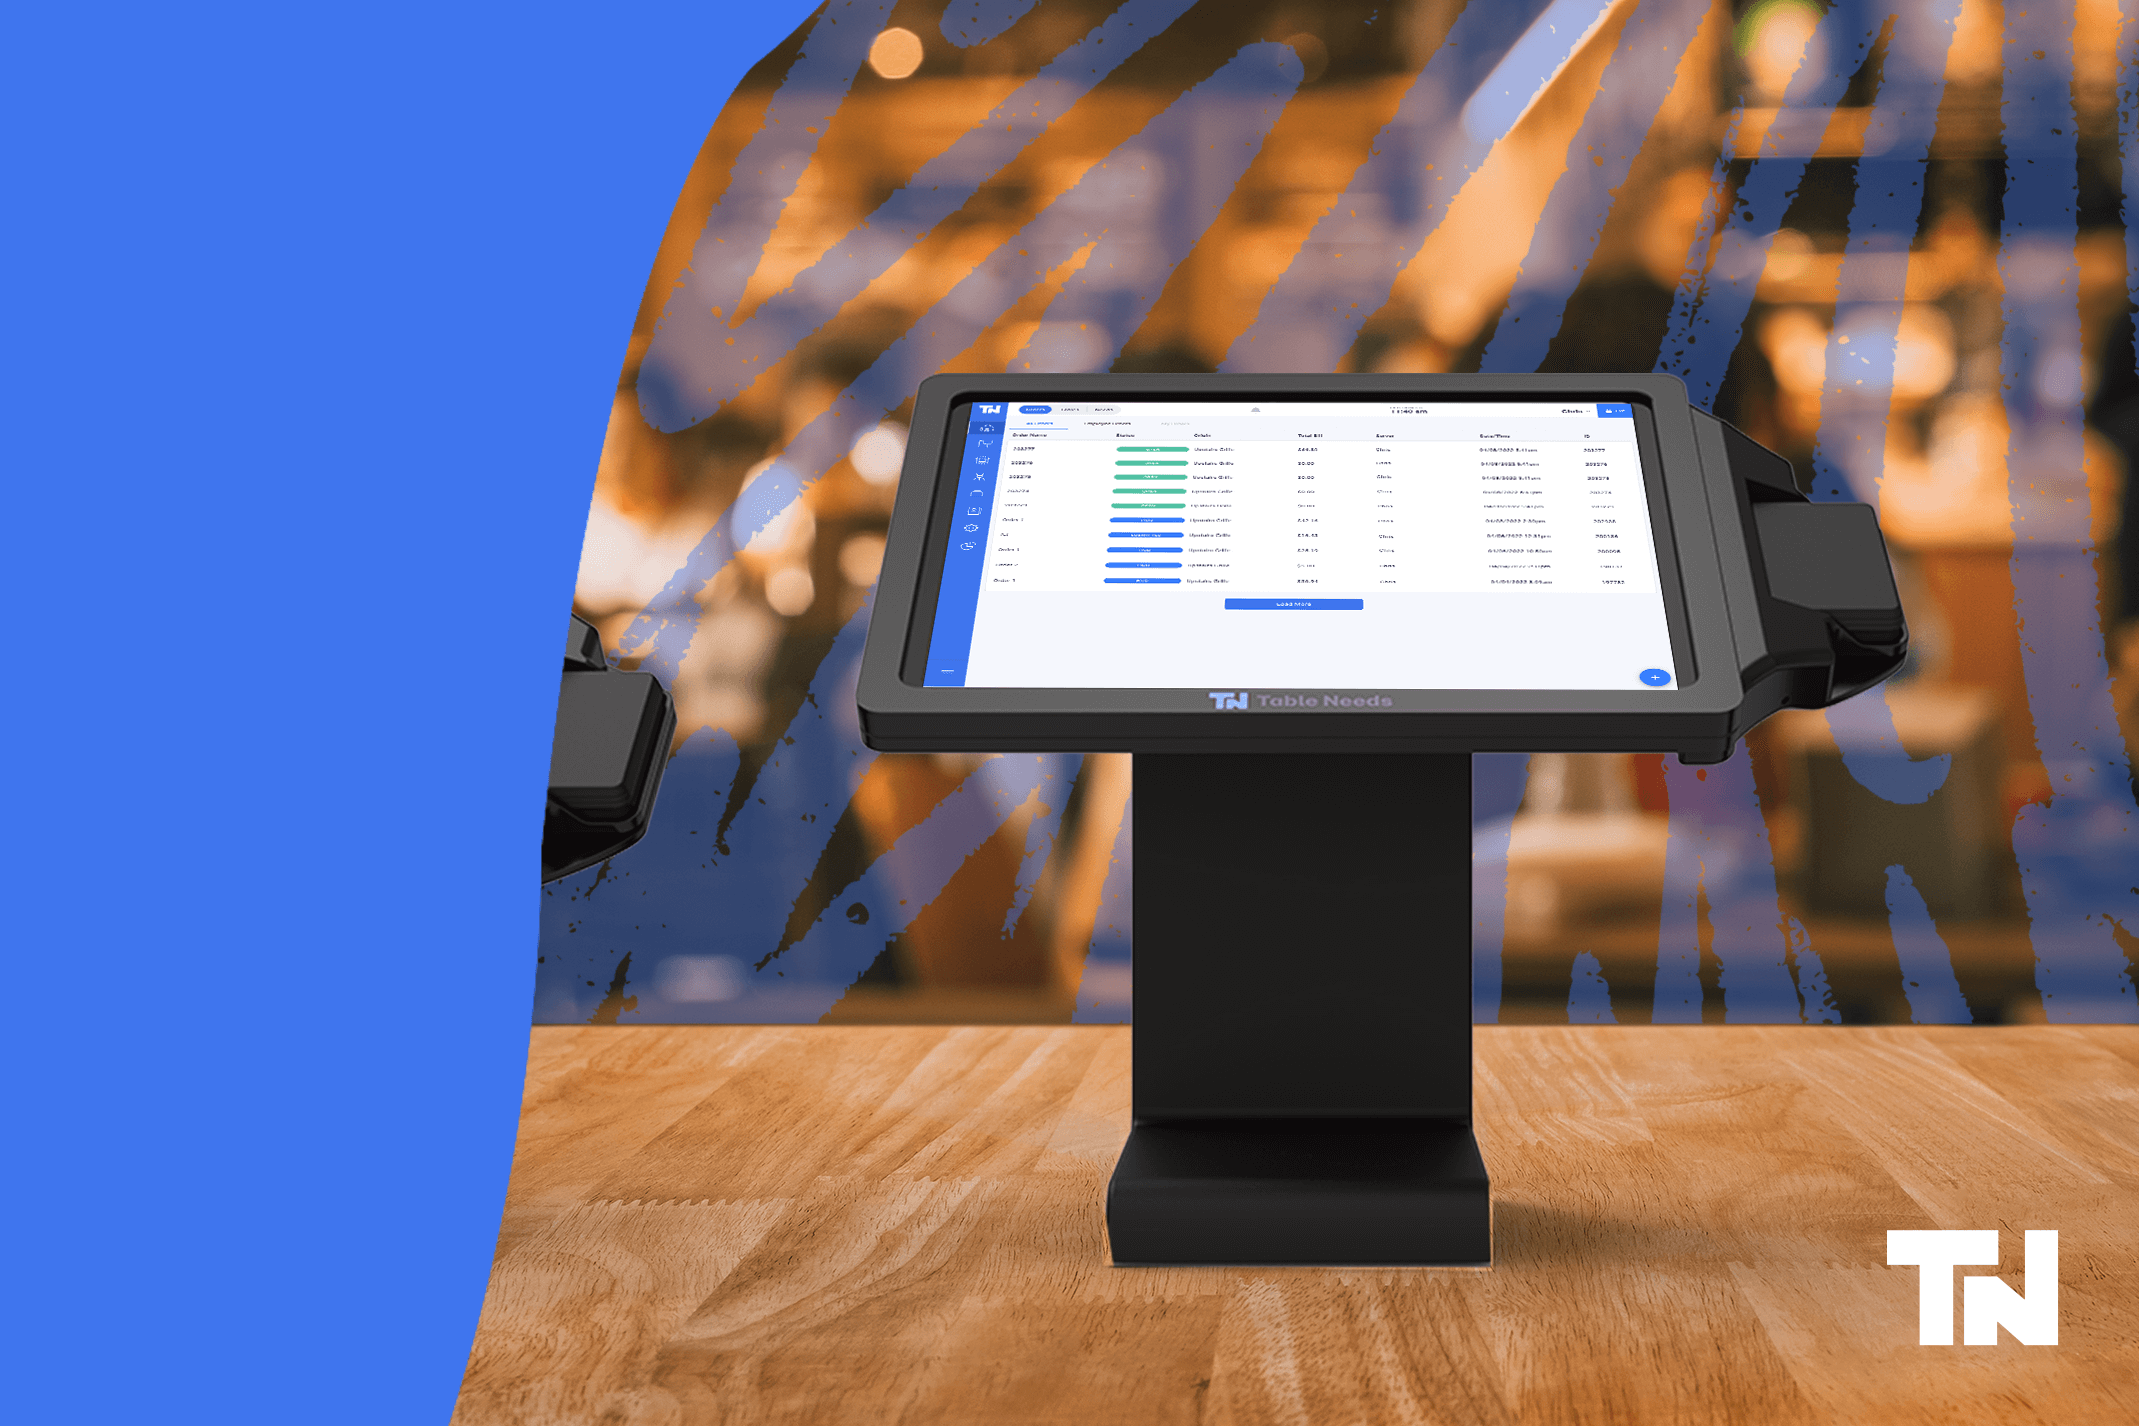 Need a new restaurant POS but not sure which one? Read on for an honest comparison of Table Needs vs Square and choose the best POS for your restaurant.